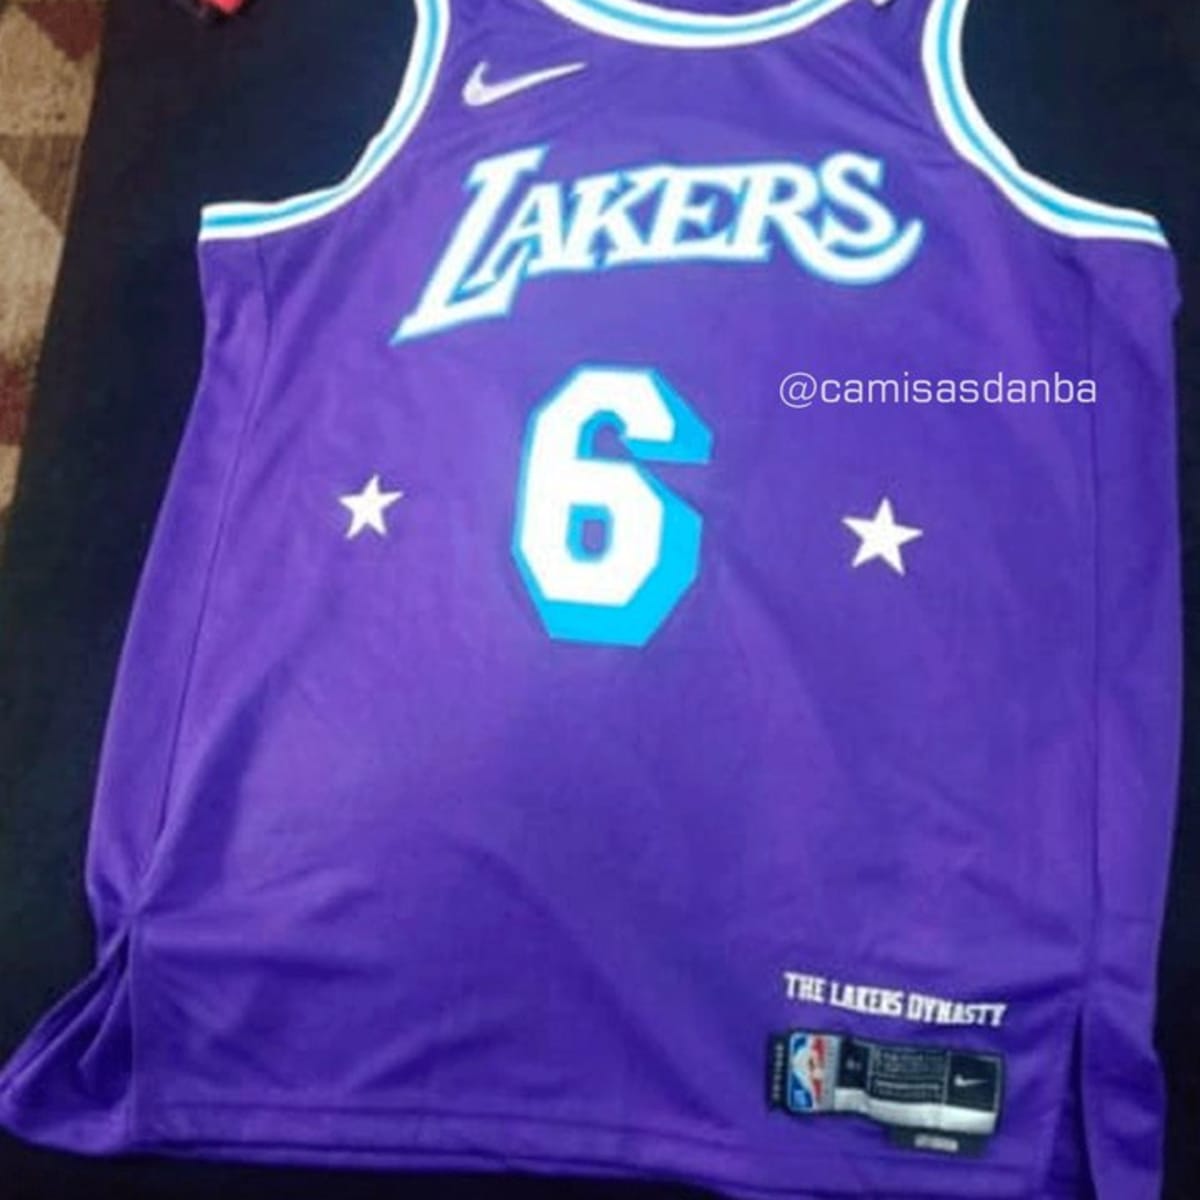 The Lakers' 2023-24 City Edition uniform appears to have leaked